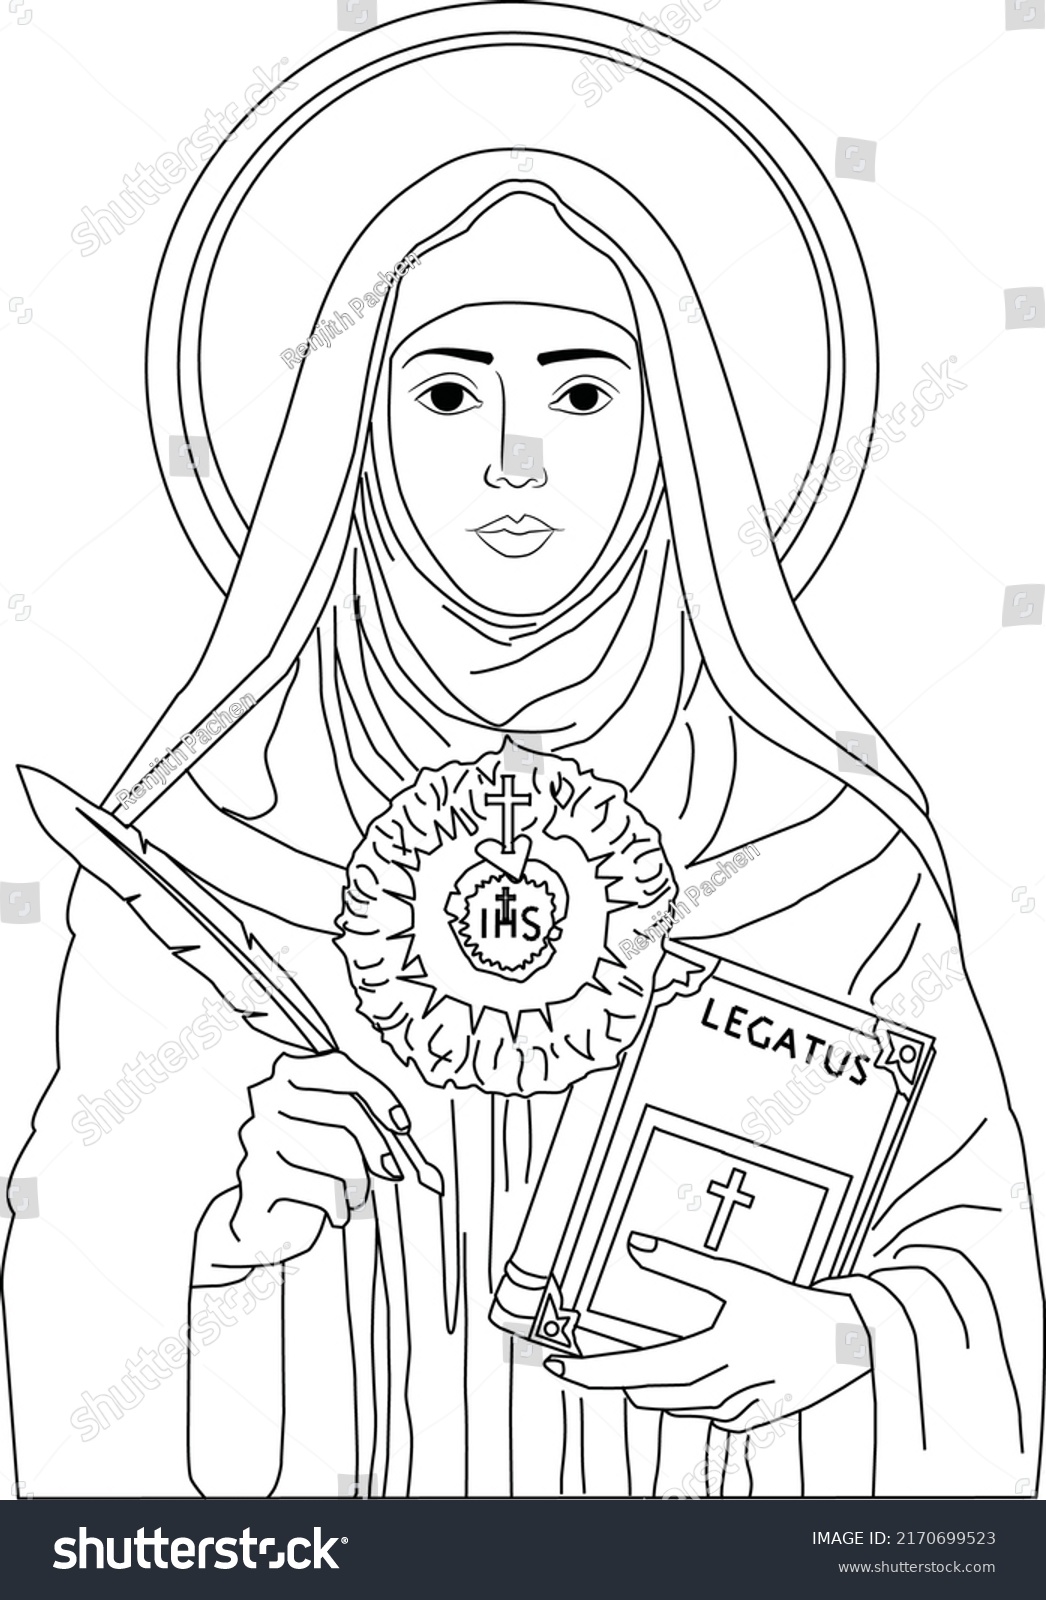 OUTLINE SKETCH OF SAINT GERTRUDE THE GREAT - Royalty Free Stock Vector ...